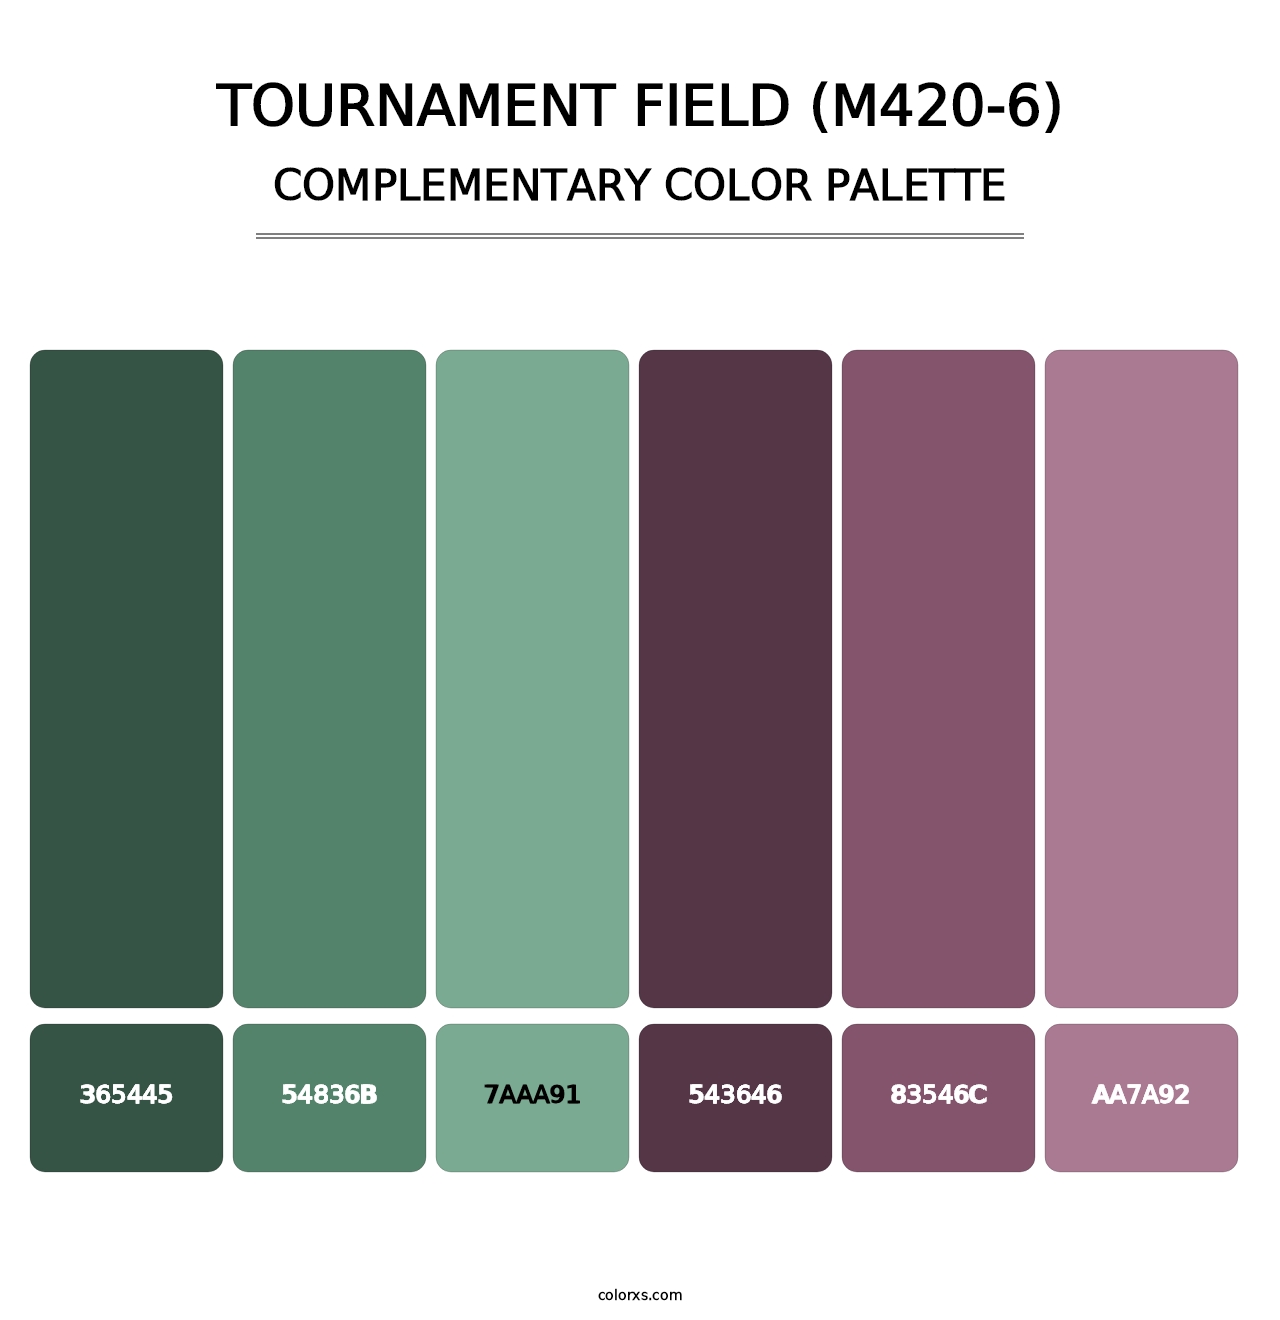 Tournament Field (M420-6) - Complementary Color Palette